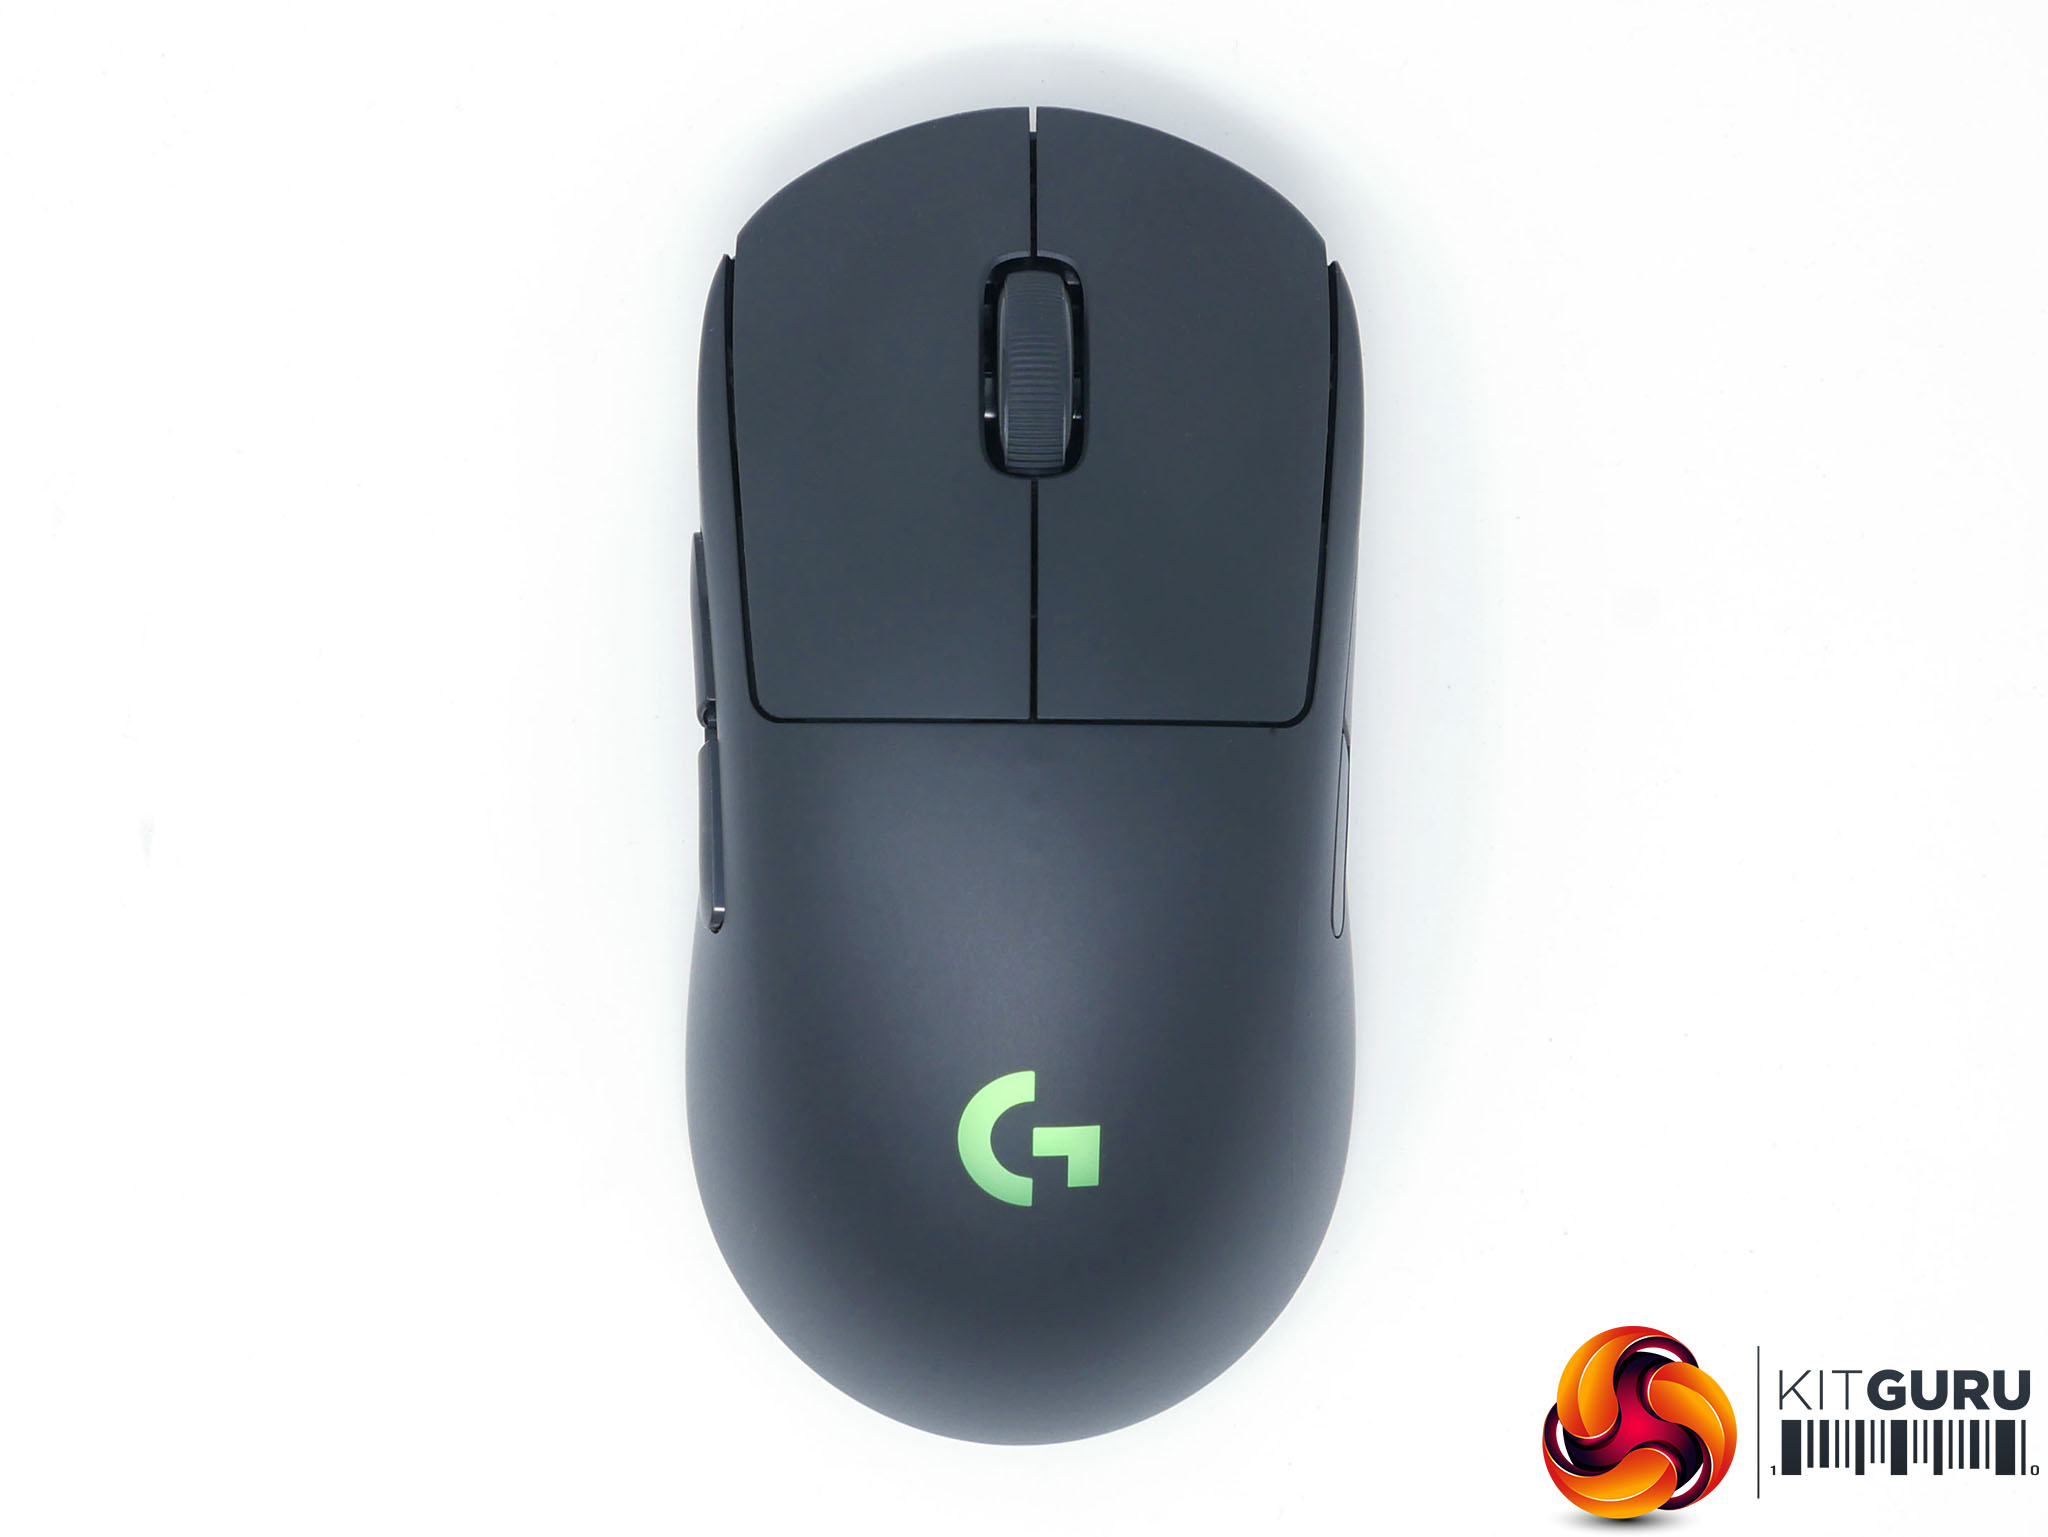 Logitech G Pro Wireless Gaming Mouse review: This mouse shouldn't